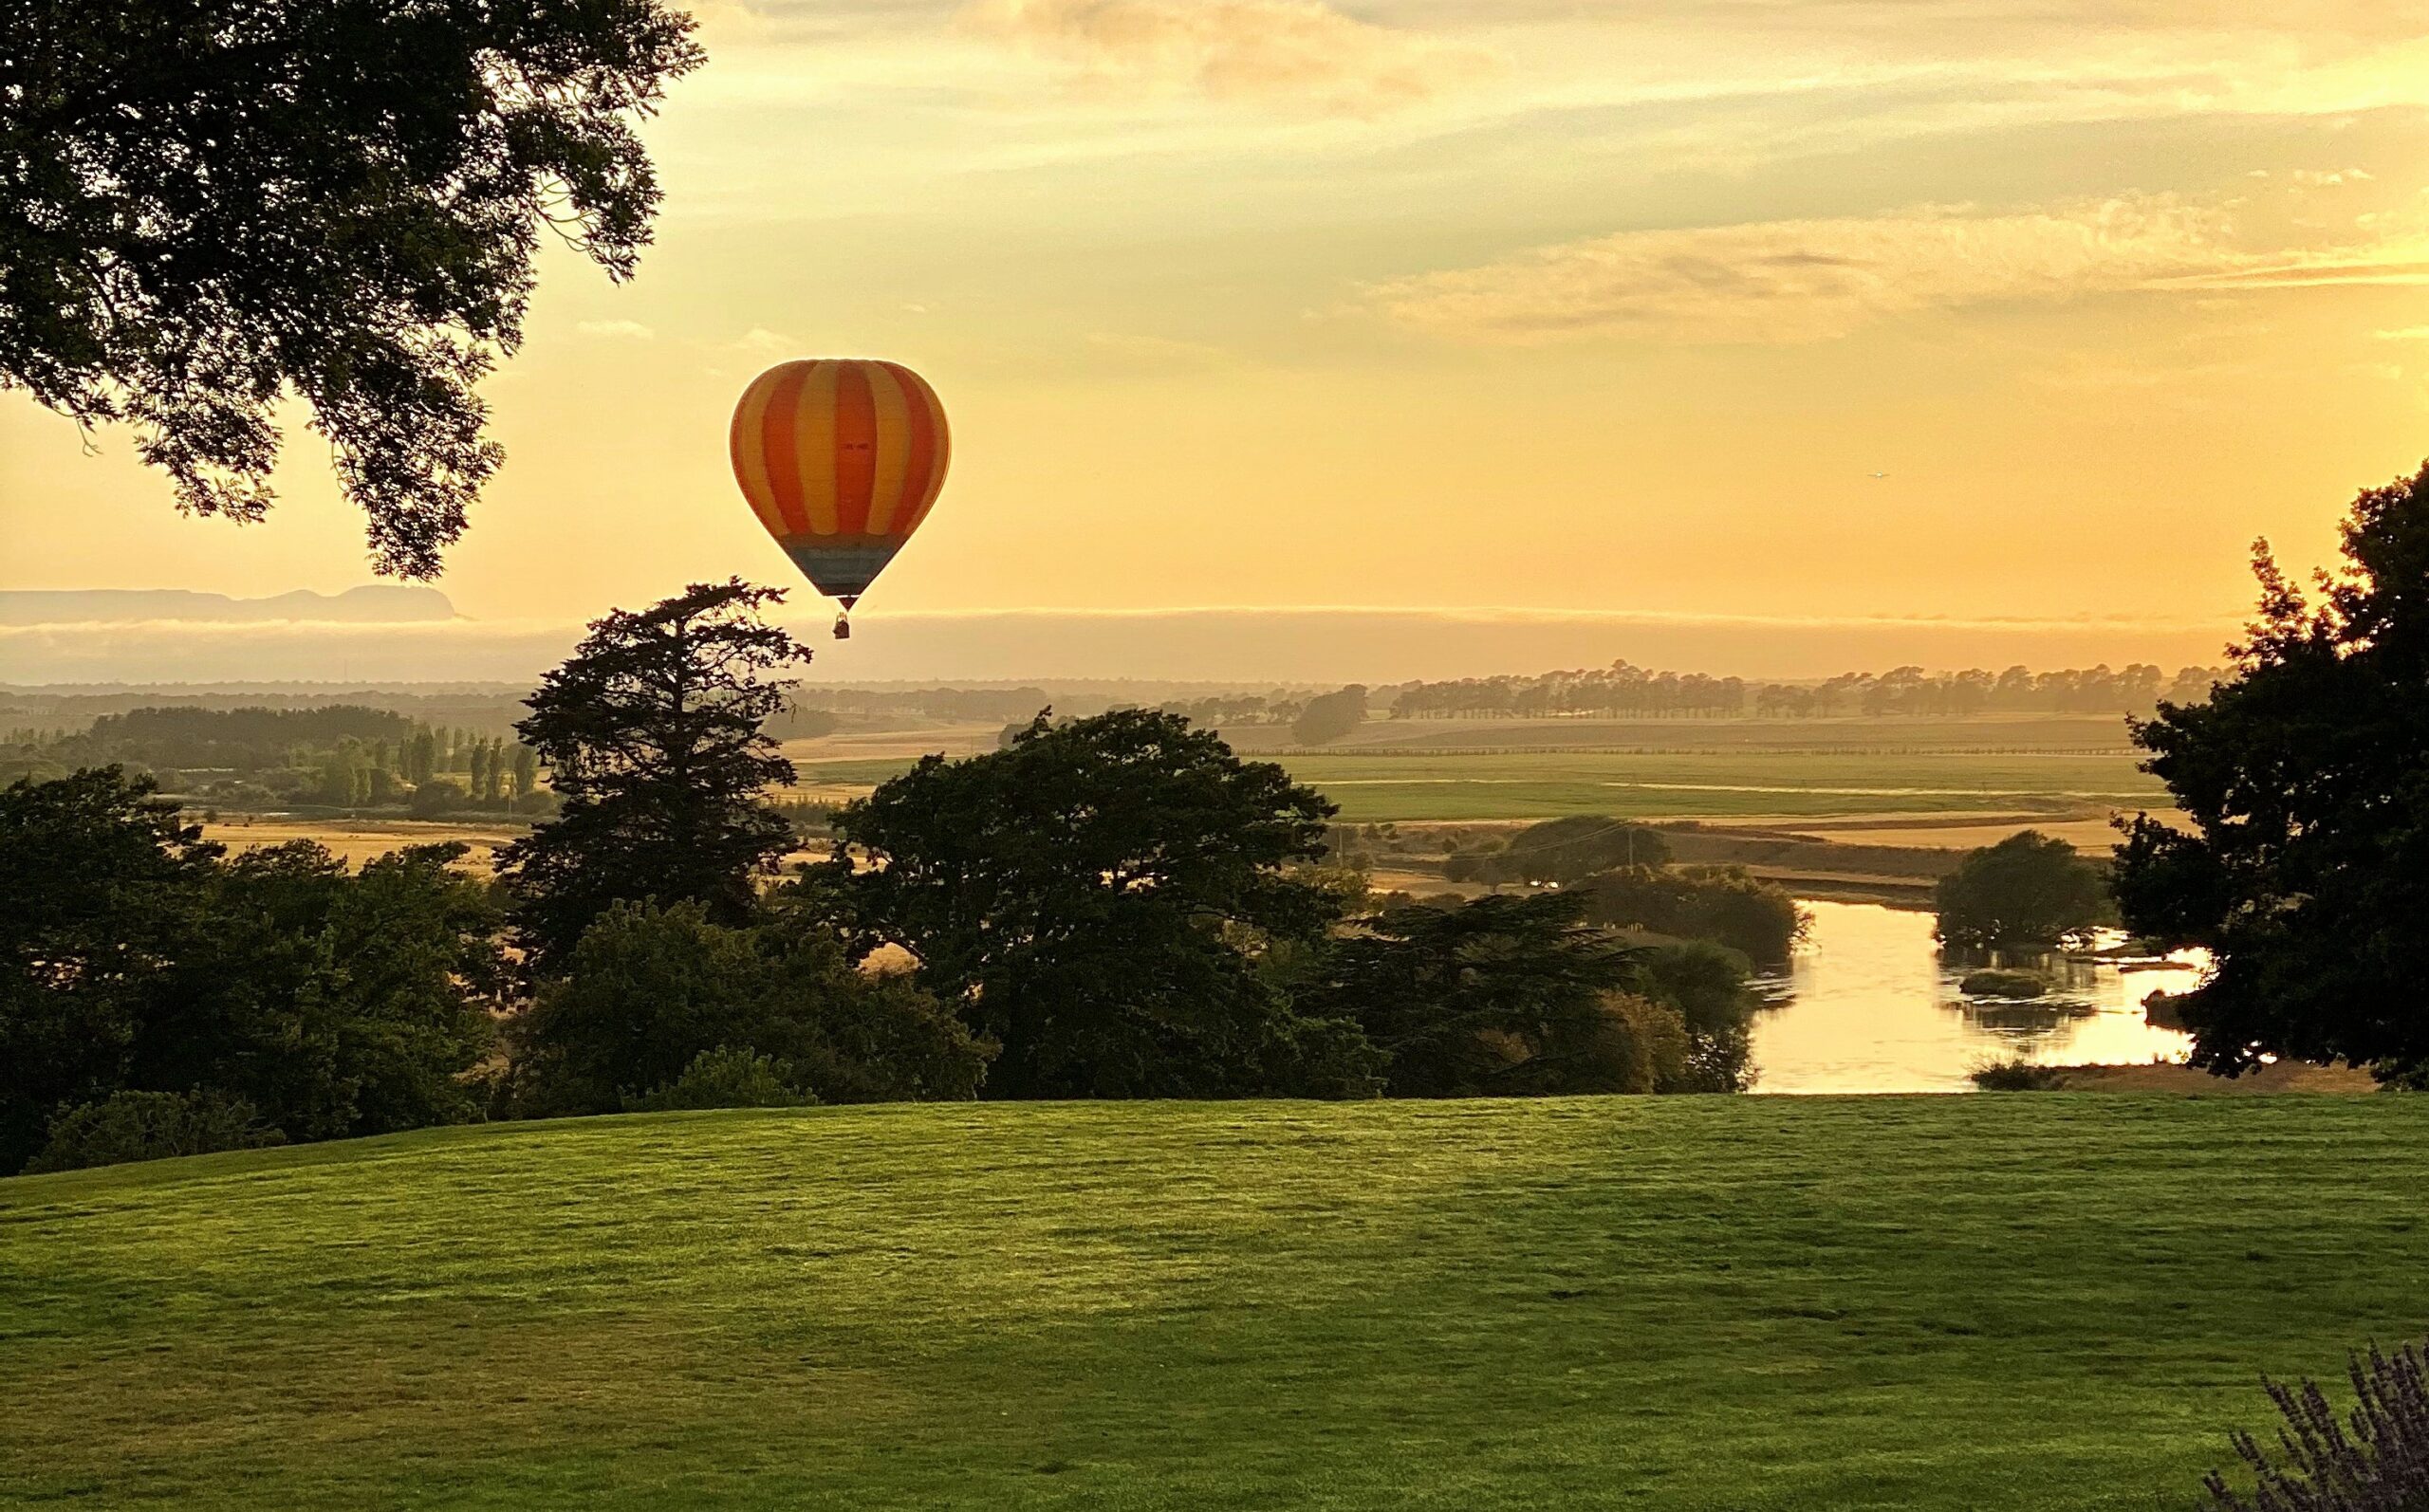 Ballooning over the Avon Valley, Perth